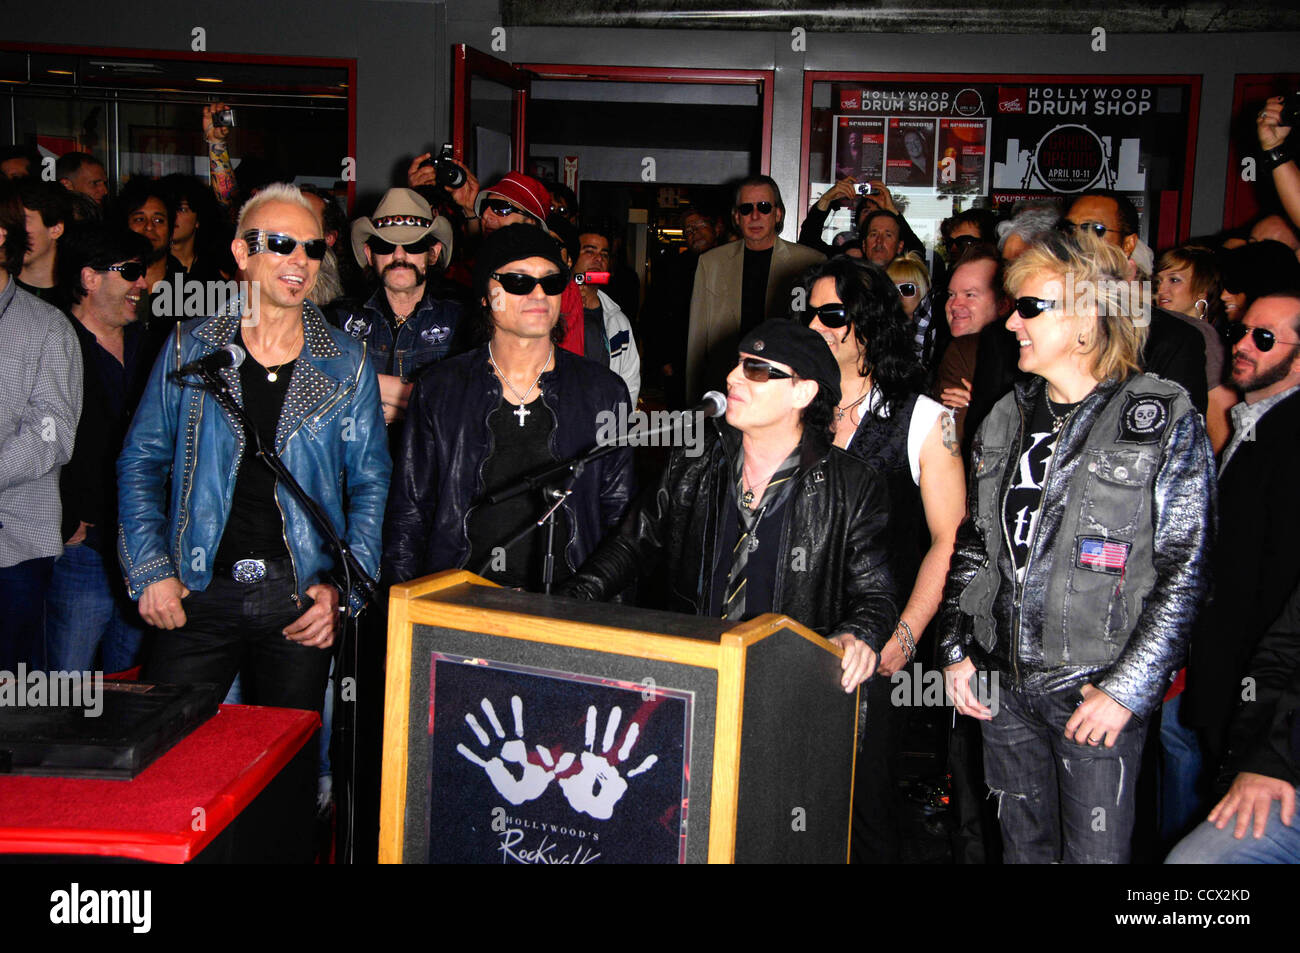 Apr. 06, 2010 - Hollywood, California, United States - Rudolf Schenker, Lemmy Kilmister, Matthias Jabs, Klaus Meine, Pawel Maciwoda and James Kottak during a ceremony inducting the Scorpions into Hollywood's Rockwalk, on April 6, 2010, on Sunset Blvd. in Los Angeles.. K64575MGE(Credit Image: Â© Mich Stock Photo